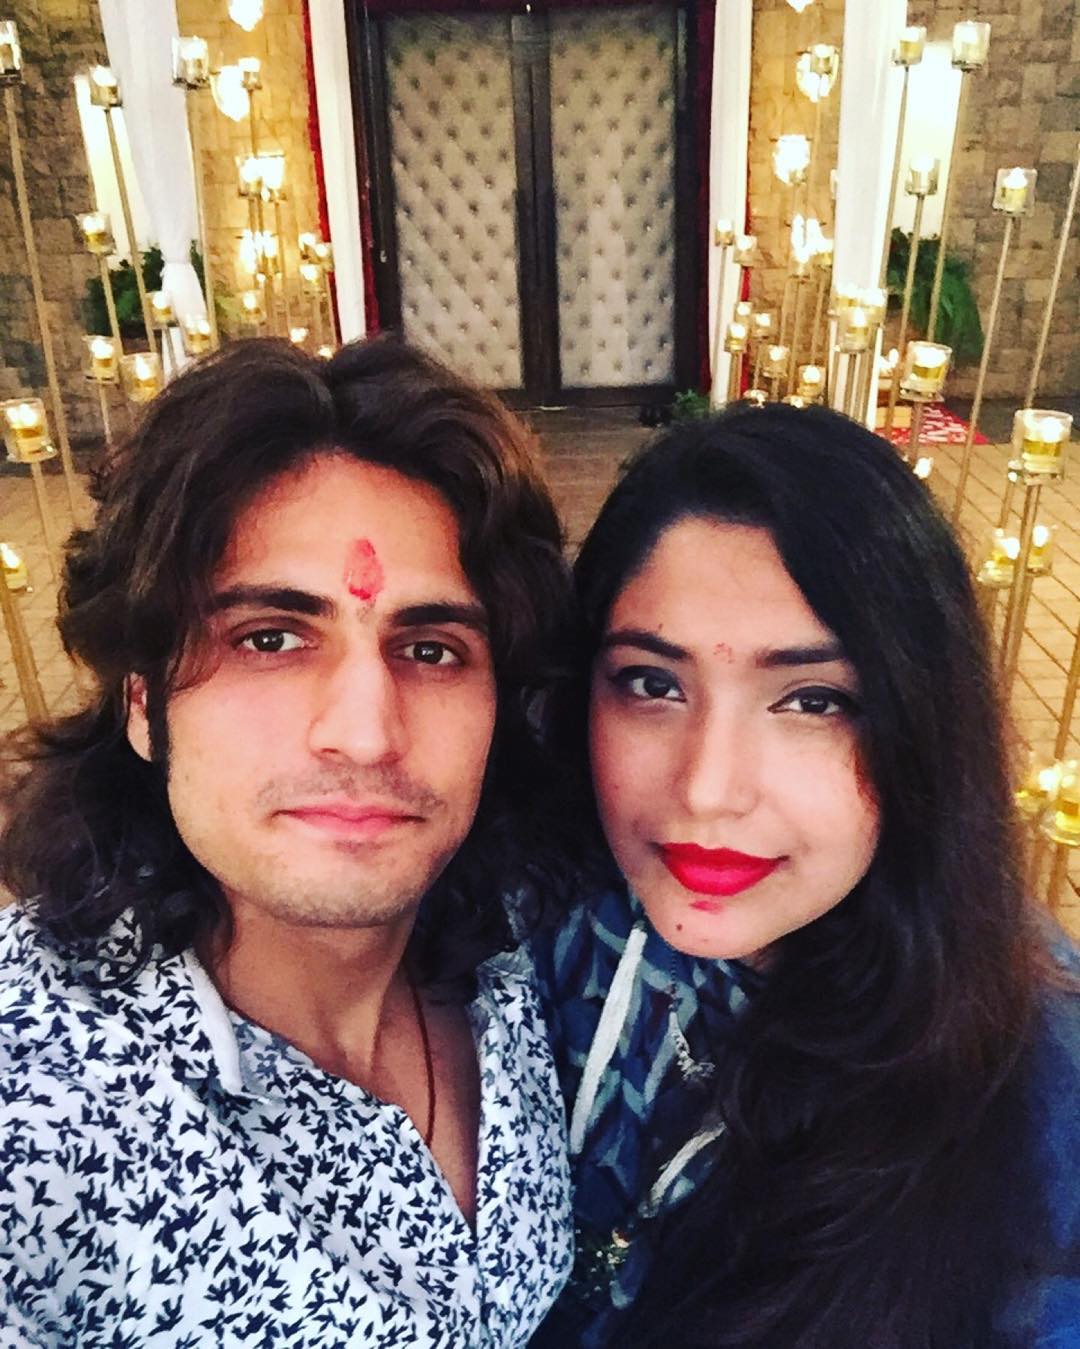 Rajat Tokas 28 Finally Answers When Is He Going To Embrace Fatherhood After 4 Years Into Marriage The latest tweets from rajat tokas (@rajattokass). rajat tokas 28 finally answers when